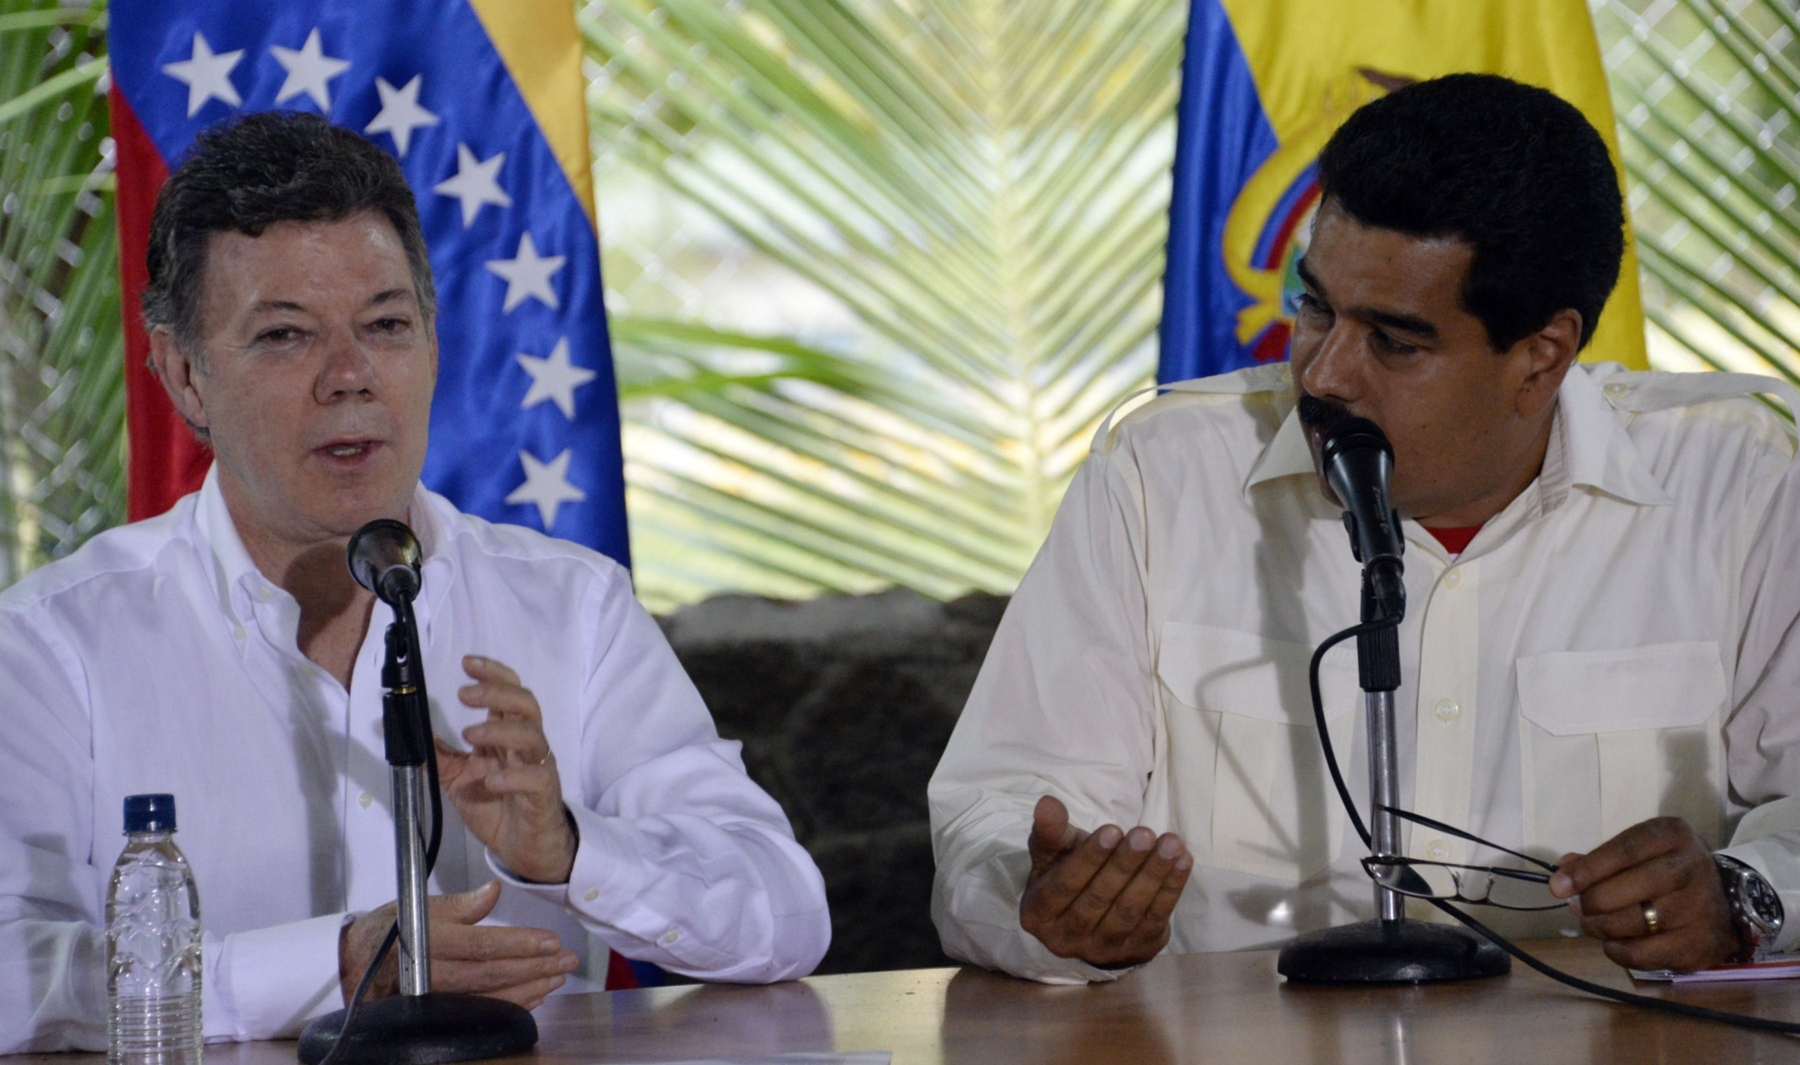 Venezuelan President Nicolas Maduro (left) listens to his Colombian counterpart Juan Manuel Santos during a joint press conference in Puerto Ayacucho, Amazona state. Photo: AFP